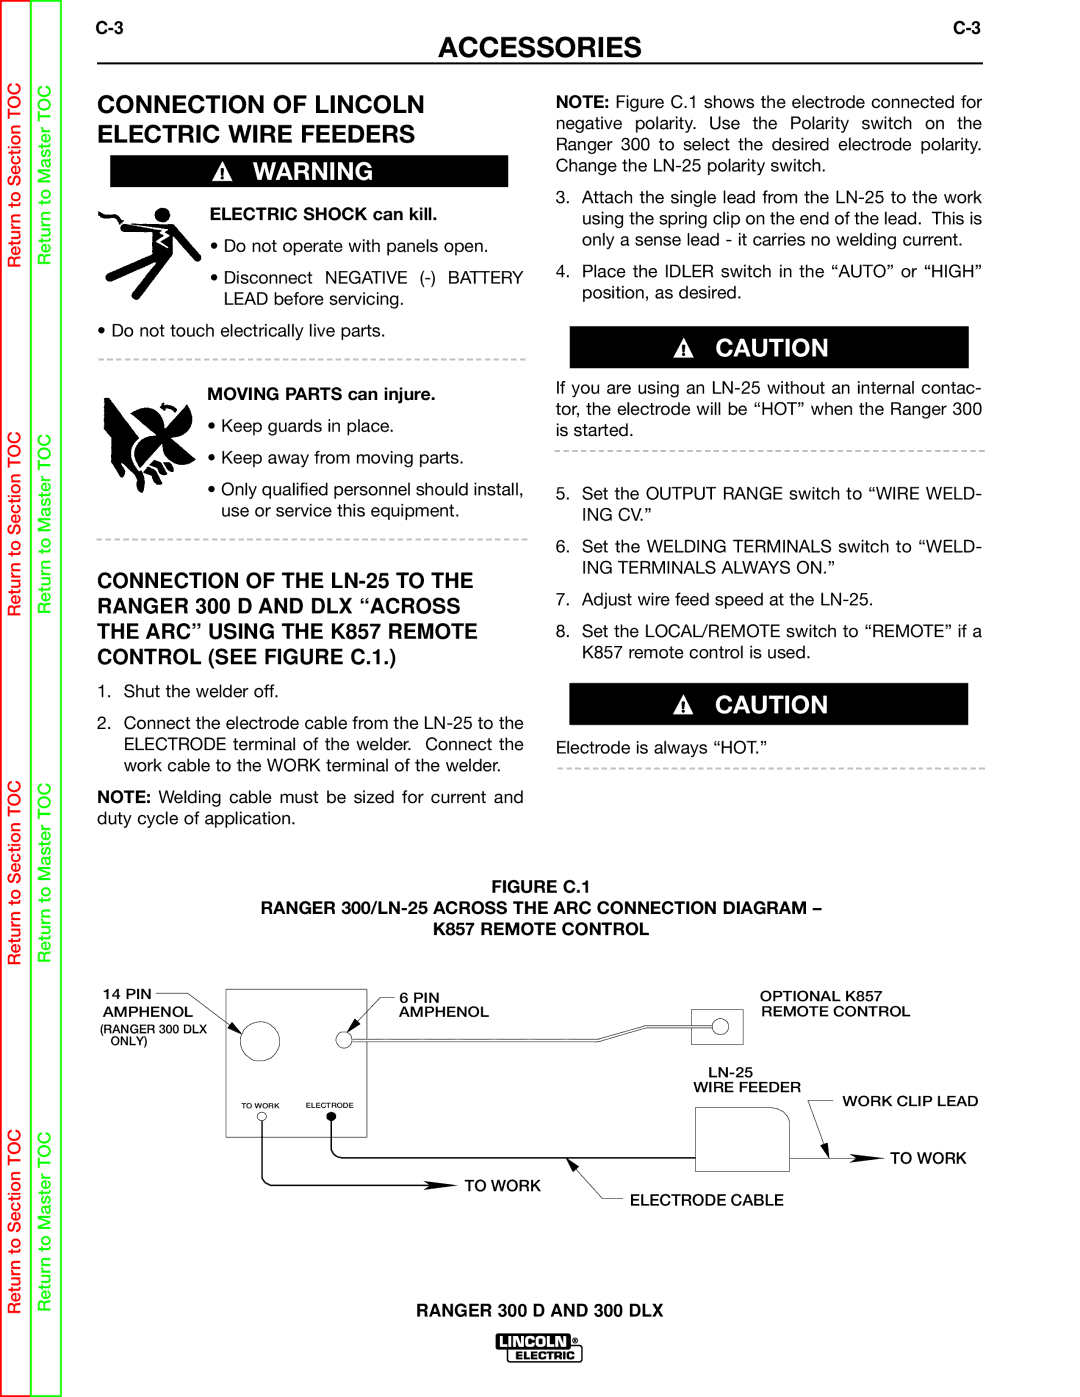 Lincoln Electric SVM148-B service manual Connection of Lincoln Electric Wire Feeders, ING Terminals Always on 